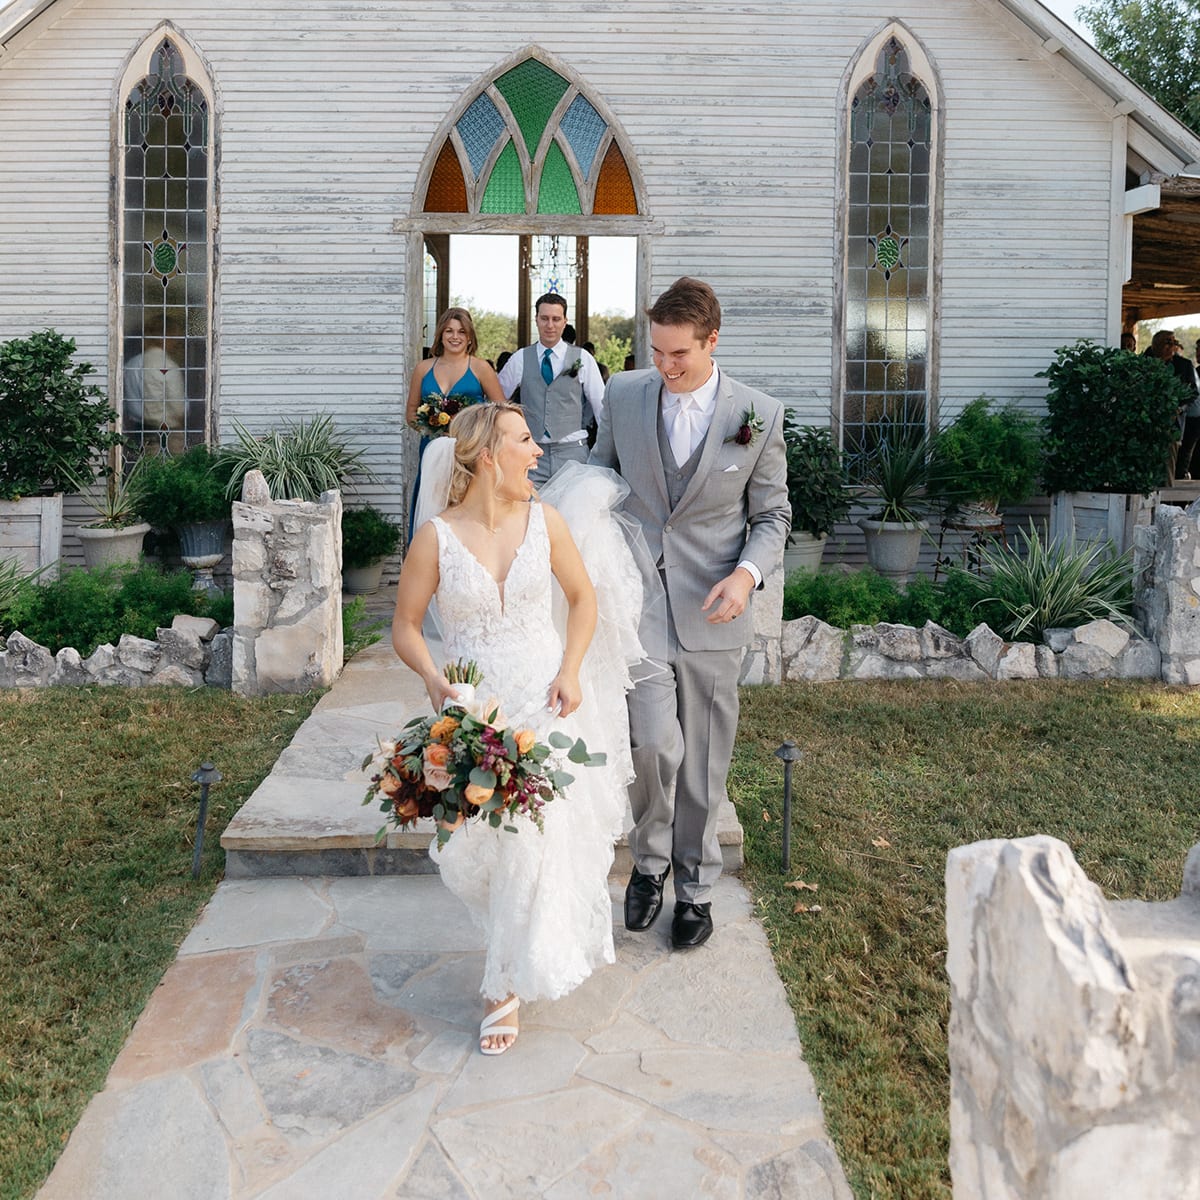 Wedding Post Production Services for Wedding Photographers